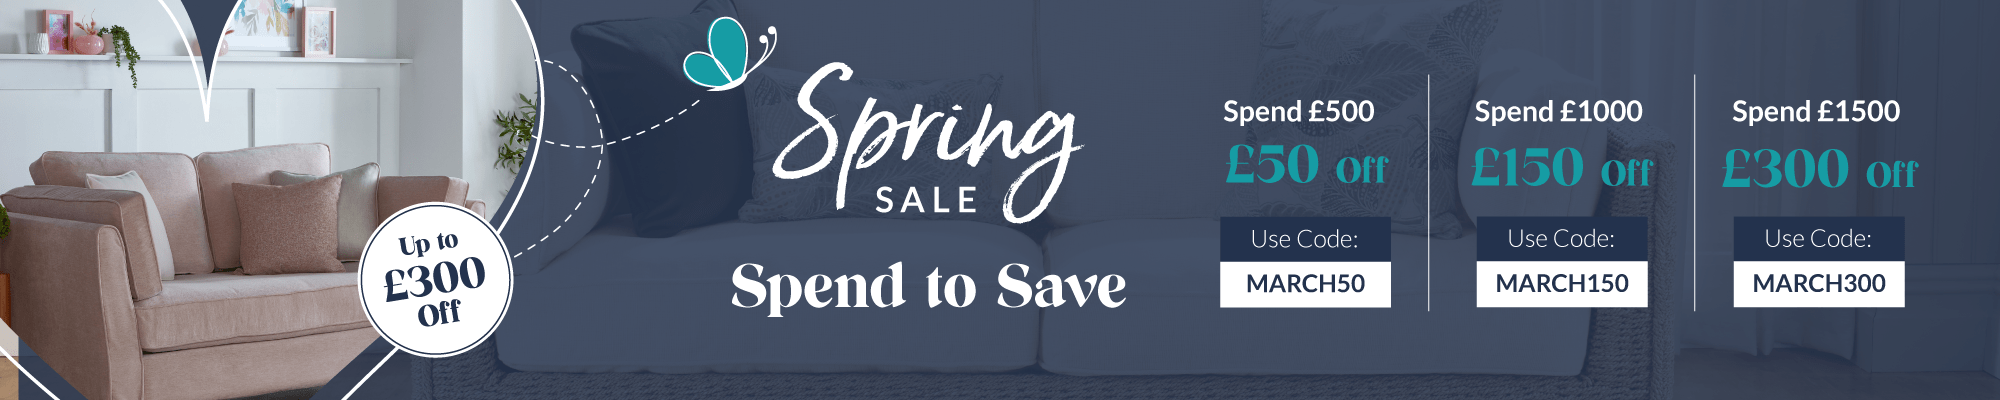 Spring Sale - Spend To Save